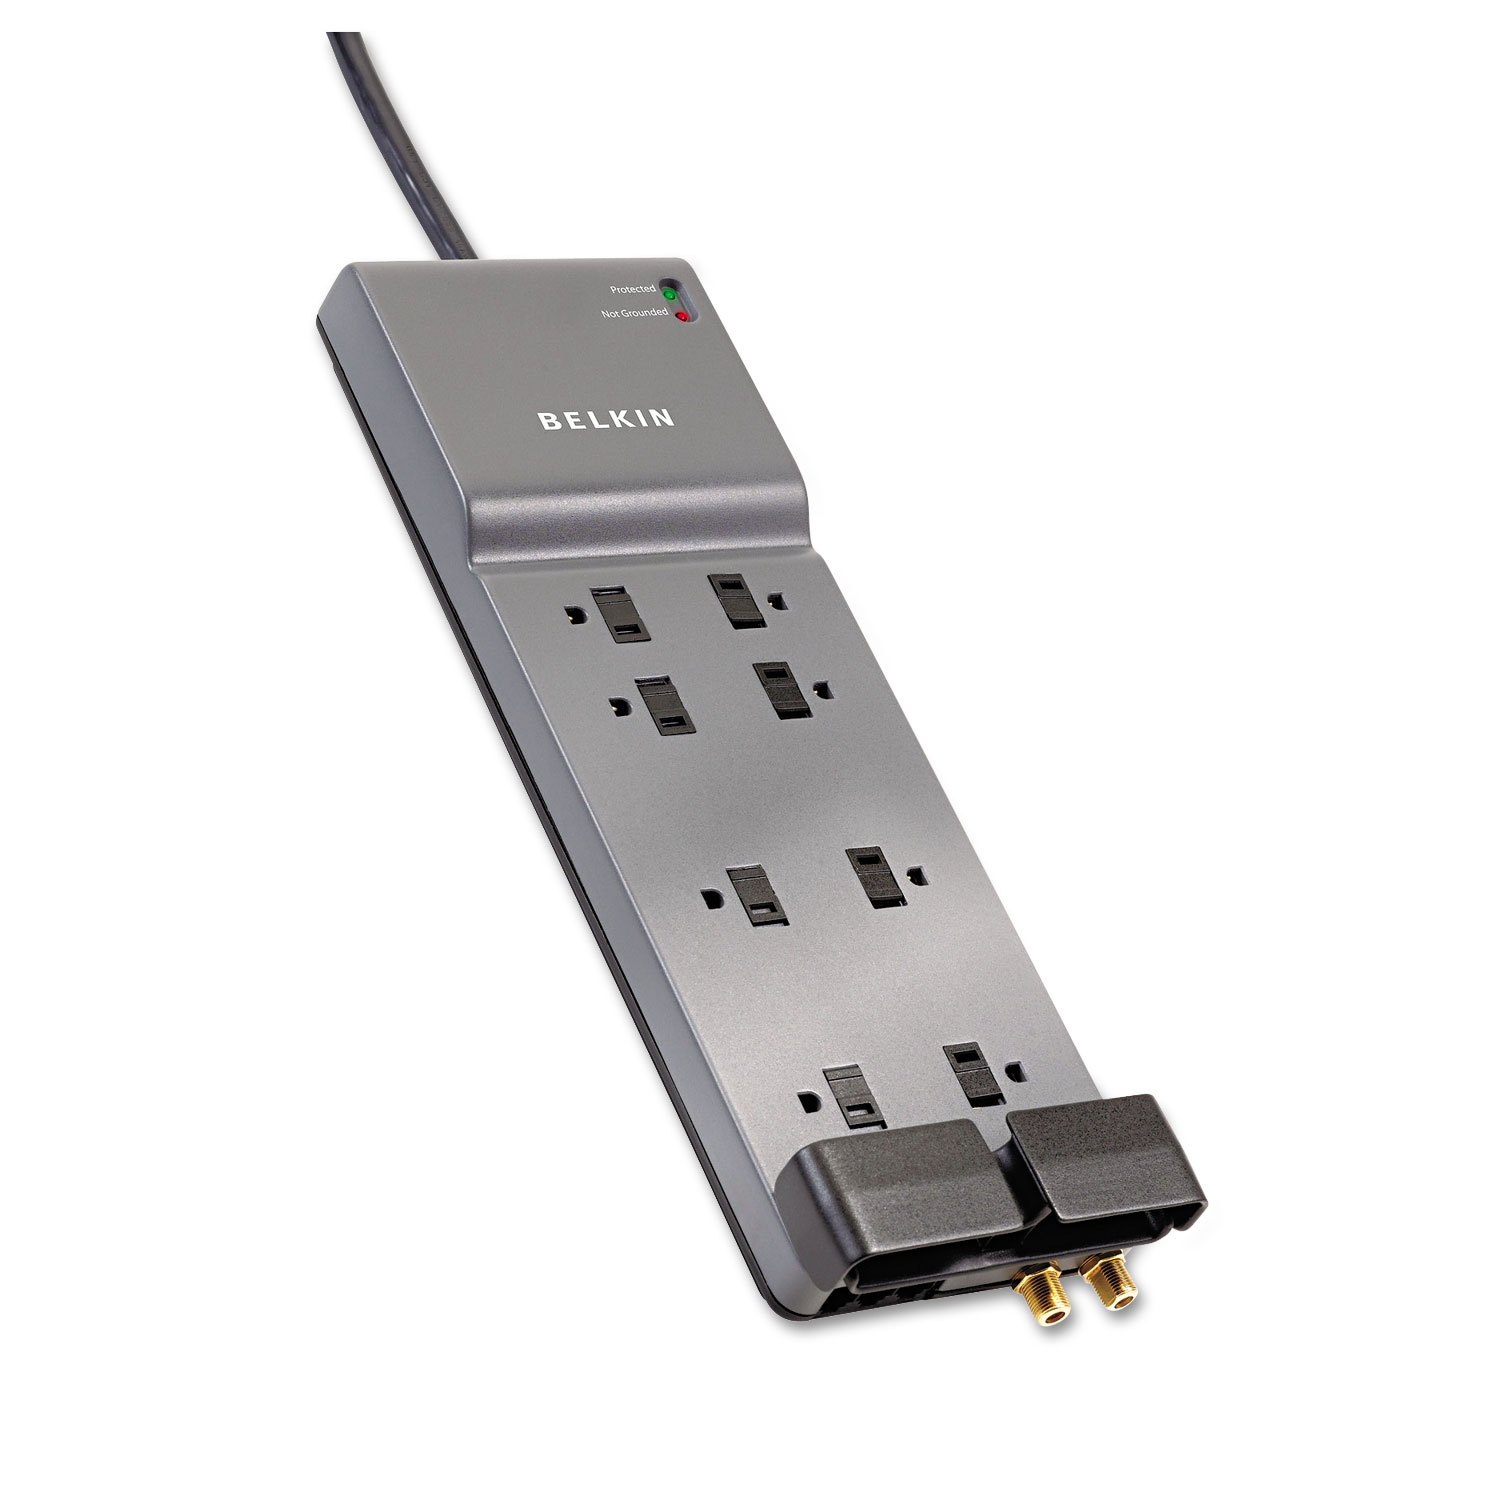  Belkin BE108230-08 Home/Office Surge Protector, 8 Outlets, 6 ft Cord, 3550 Joules, Gray (BLKBE10823006) 